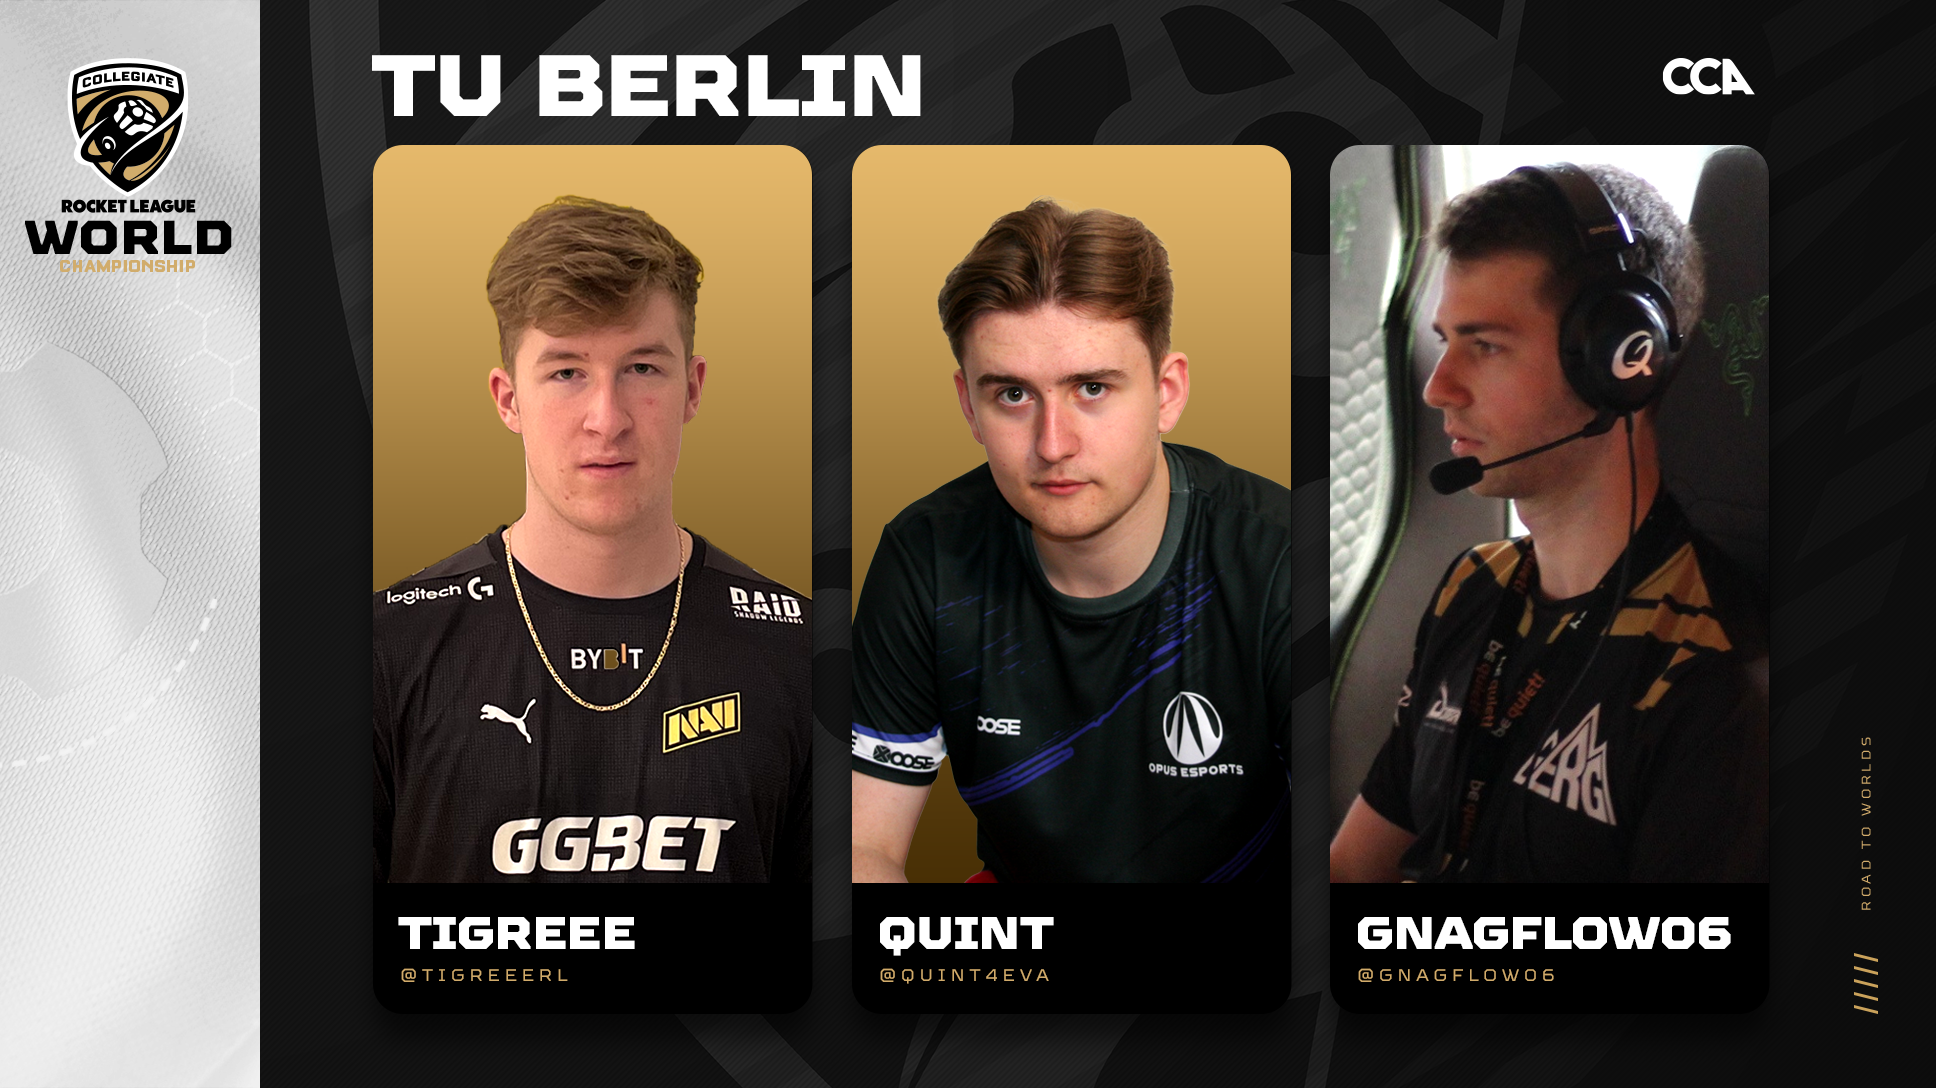 Technical University of Berlin Road to Worlds header with images of Tigreee, quint, and Gnagflow